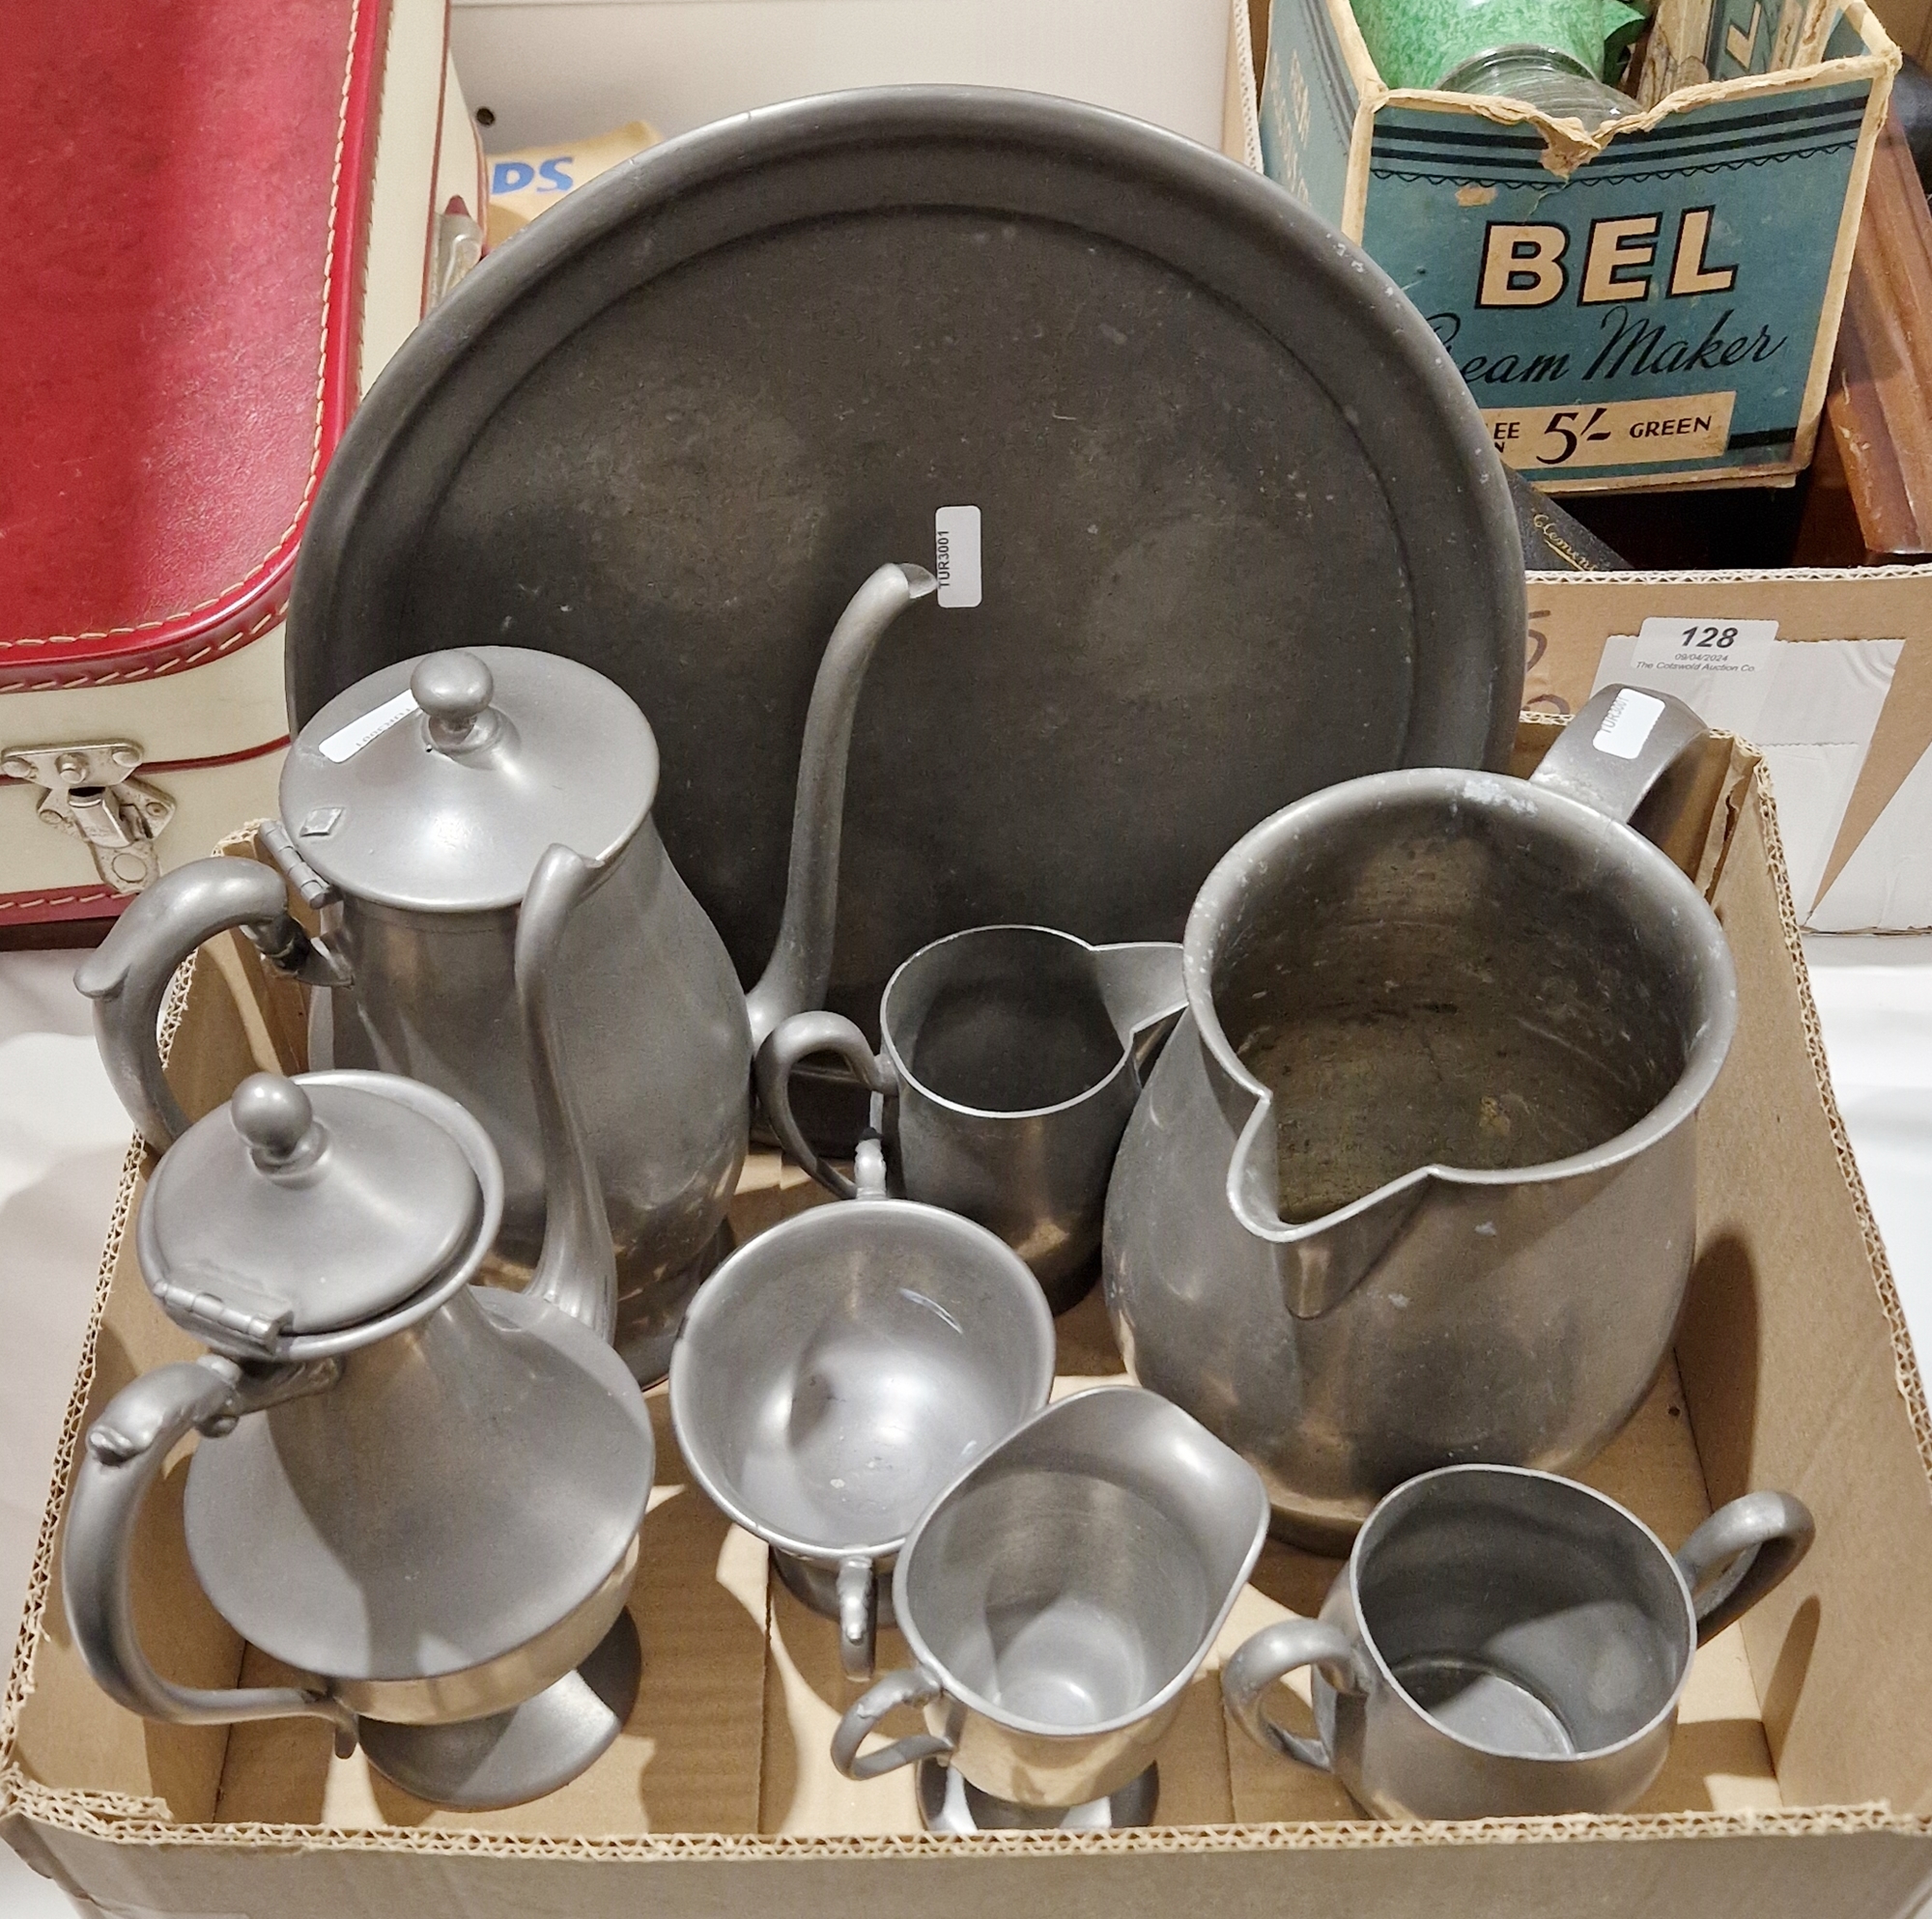 Pewter items to include chocolate pot, coffee pot, platter, jugs, etc (1 box)